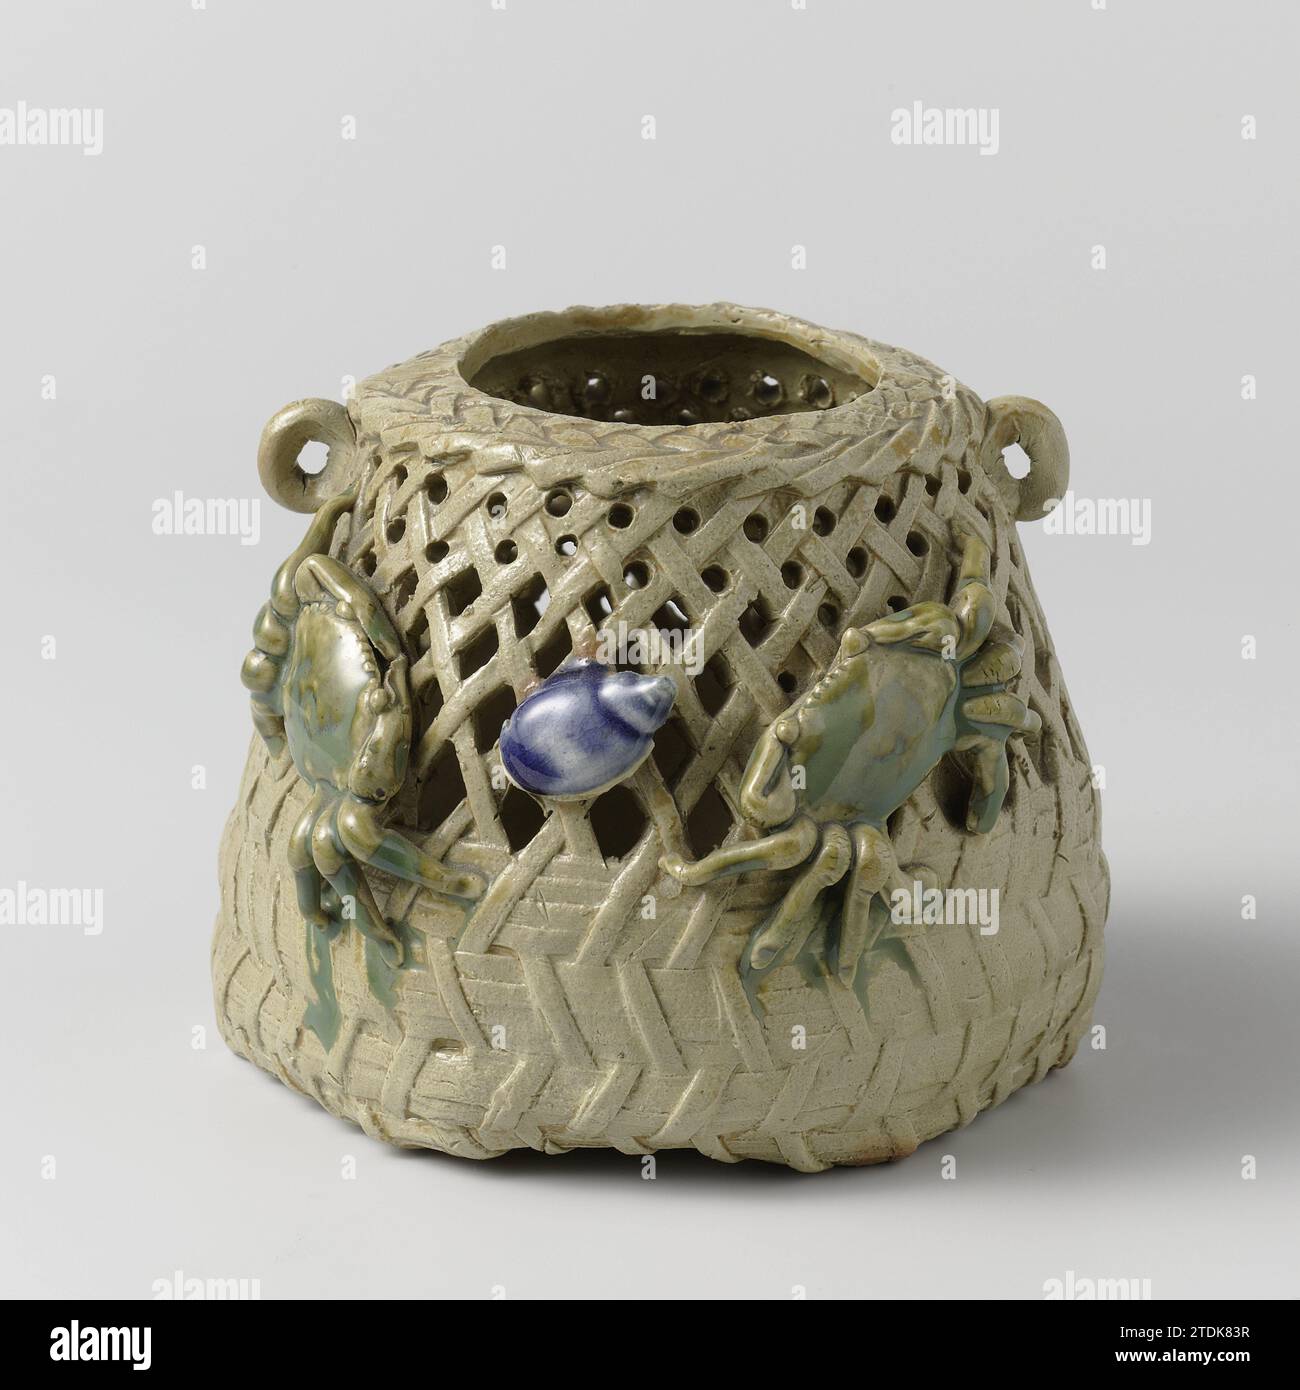 Pierced jar in the shape of a basket with two crabs and a conch, anonymous, c. 1875 - c. 1899 Pot of stoneware in the form of a basket with openwork wall and two small, raised ears, painted on the glaze in blue and green. Two modeled scratches and a shell on the outside wall. Six holes in the soil. Japan stoneware. glaze. vitrification Pot of stoneware in the form of a basket with openwork wall and two small, raised ears, painted on the glaze in blue and green. Two modeled scratches and a shell on the outside wall. Six holes in the soil. Japan stoneware. glaze. vitrification Stock Photo